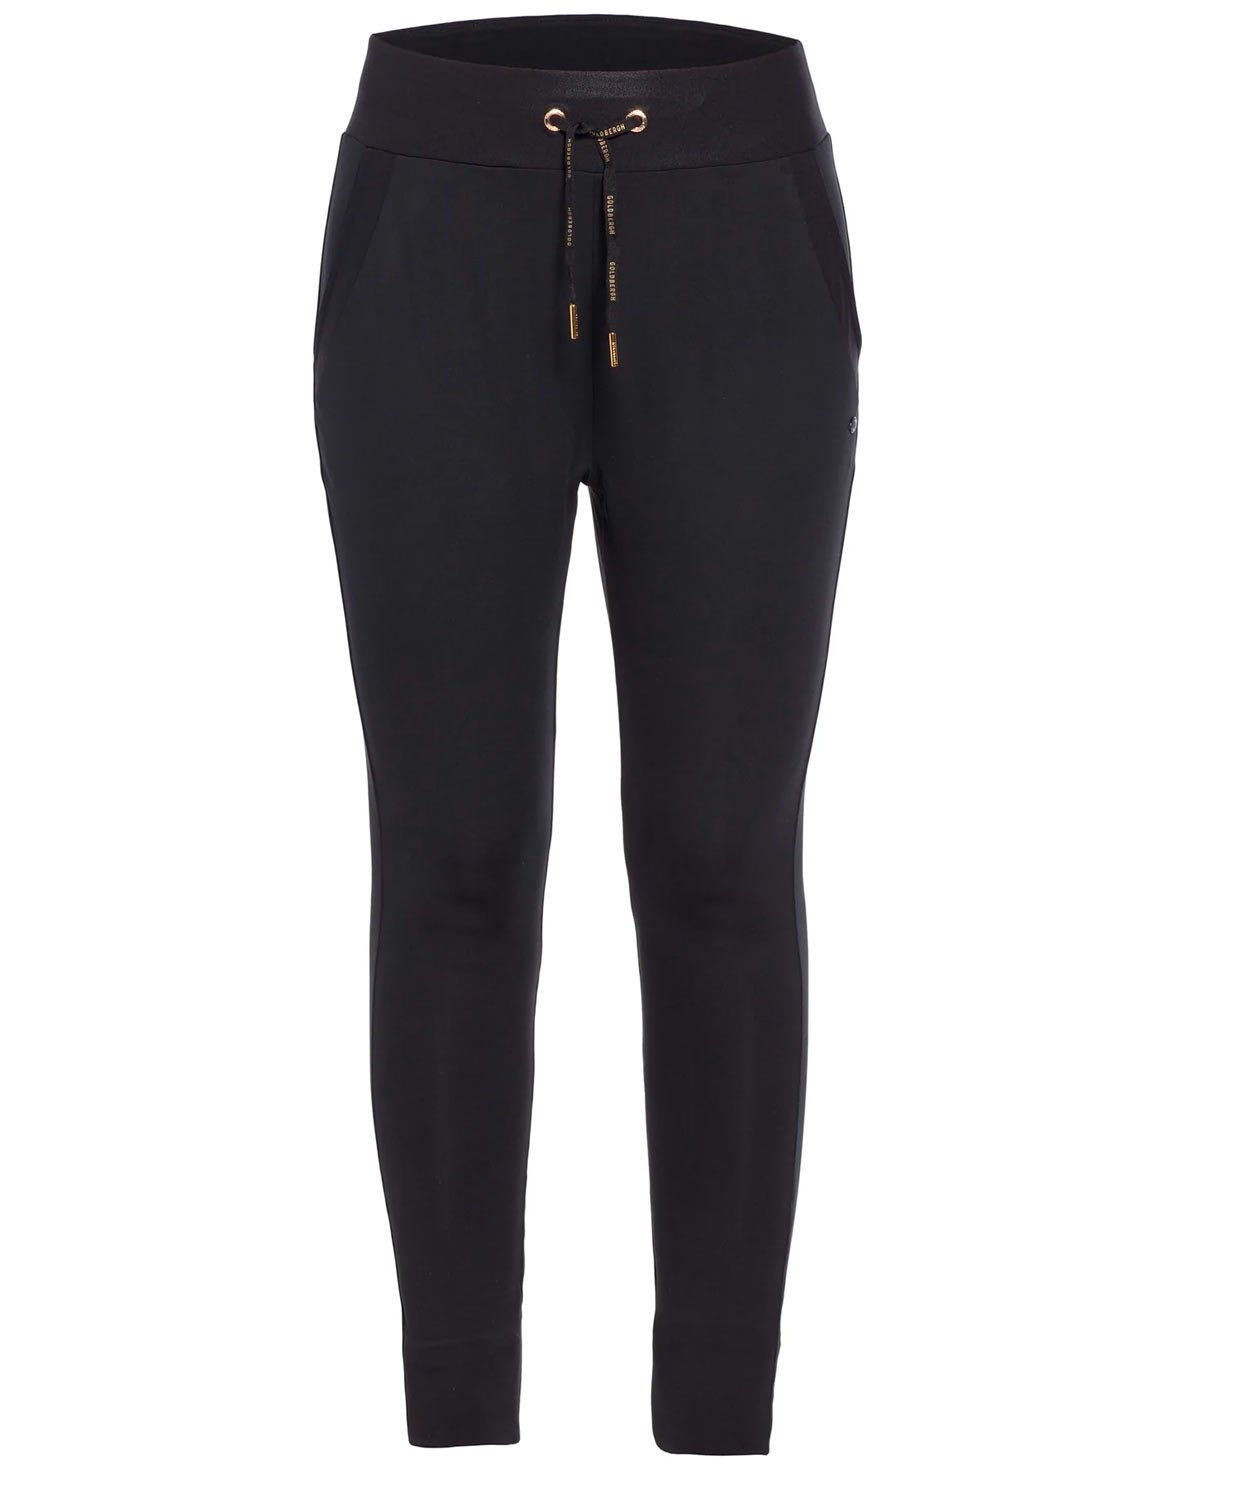 Women’s Darcy Track Pant